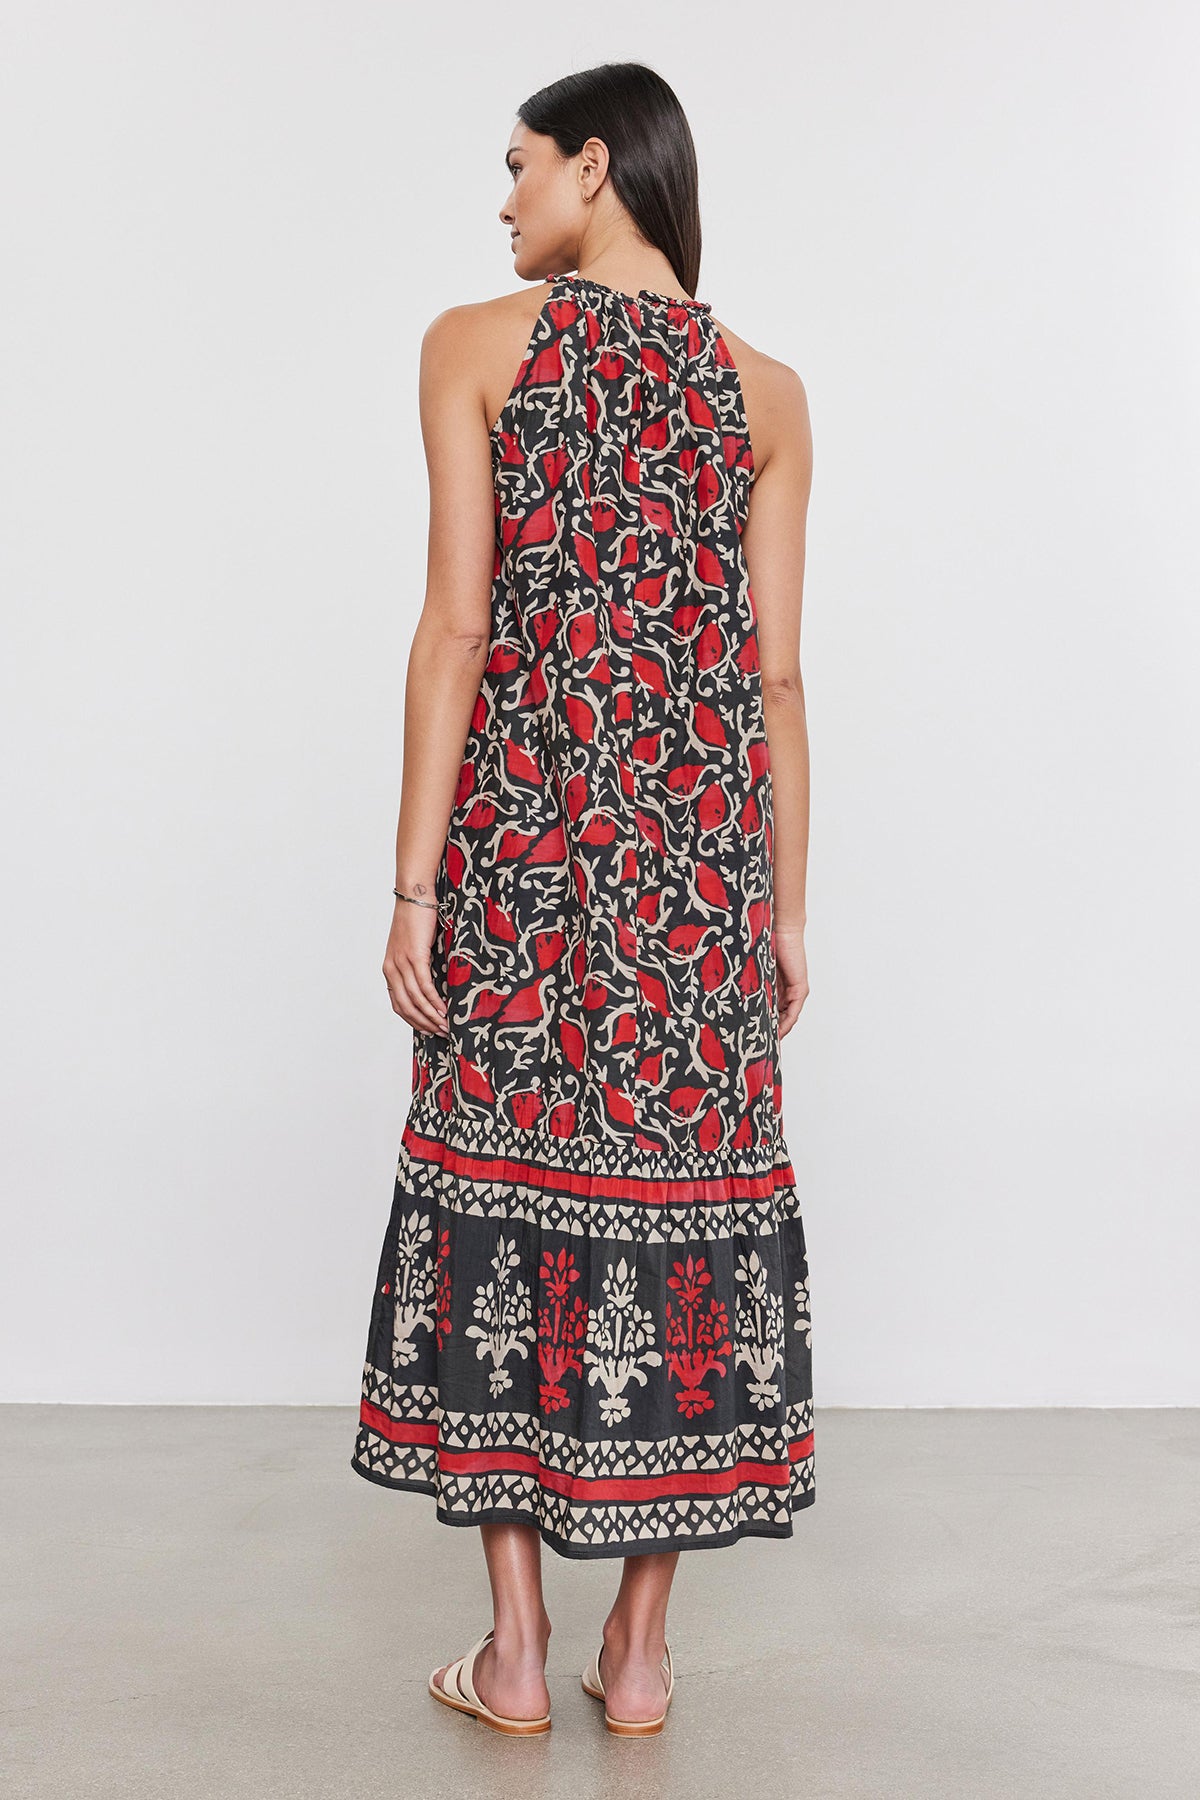 Woman standing, viewed from the back, wearing a long, sleeveless black silk cotton voile GHITA DRESS by Velvet by Graham & Spencer with bold red and white floral prints, standing in a plain studio setting.-36910024523969